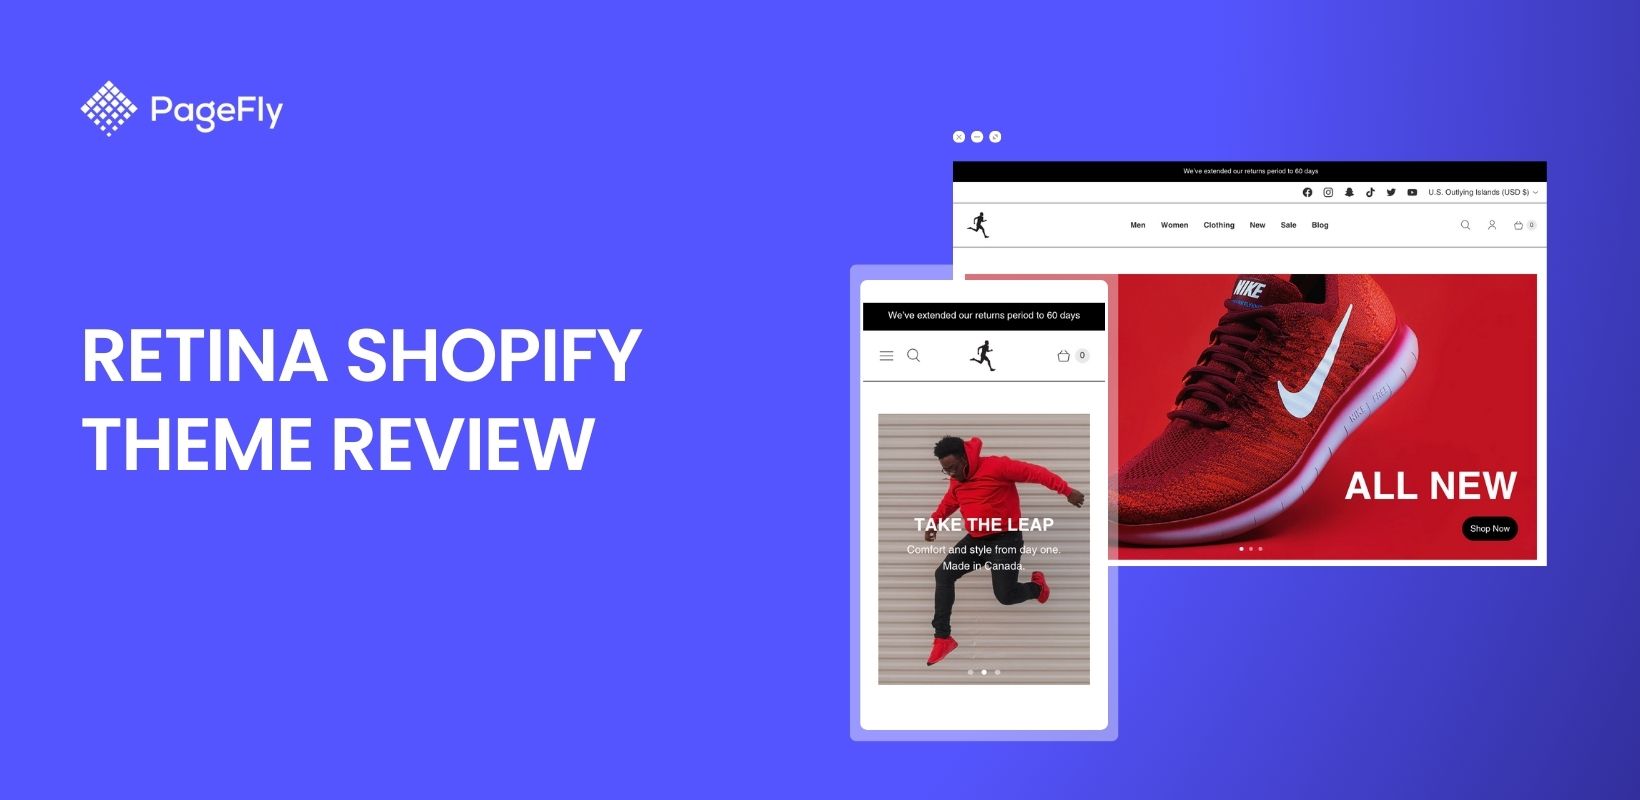 Retina Shopify Theme Review: Polished and Professional – But Does It Drive Sales?